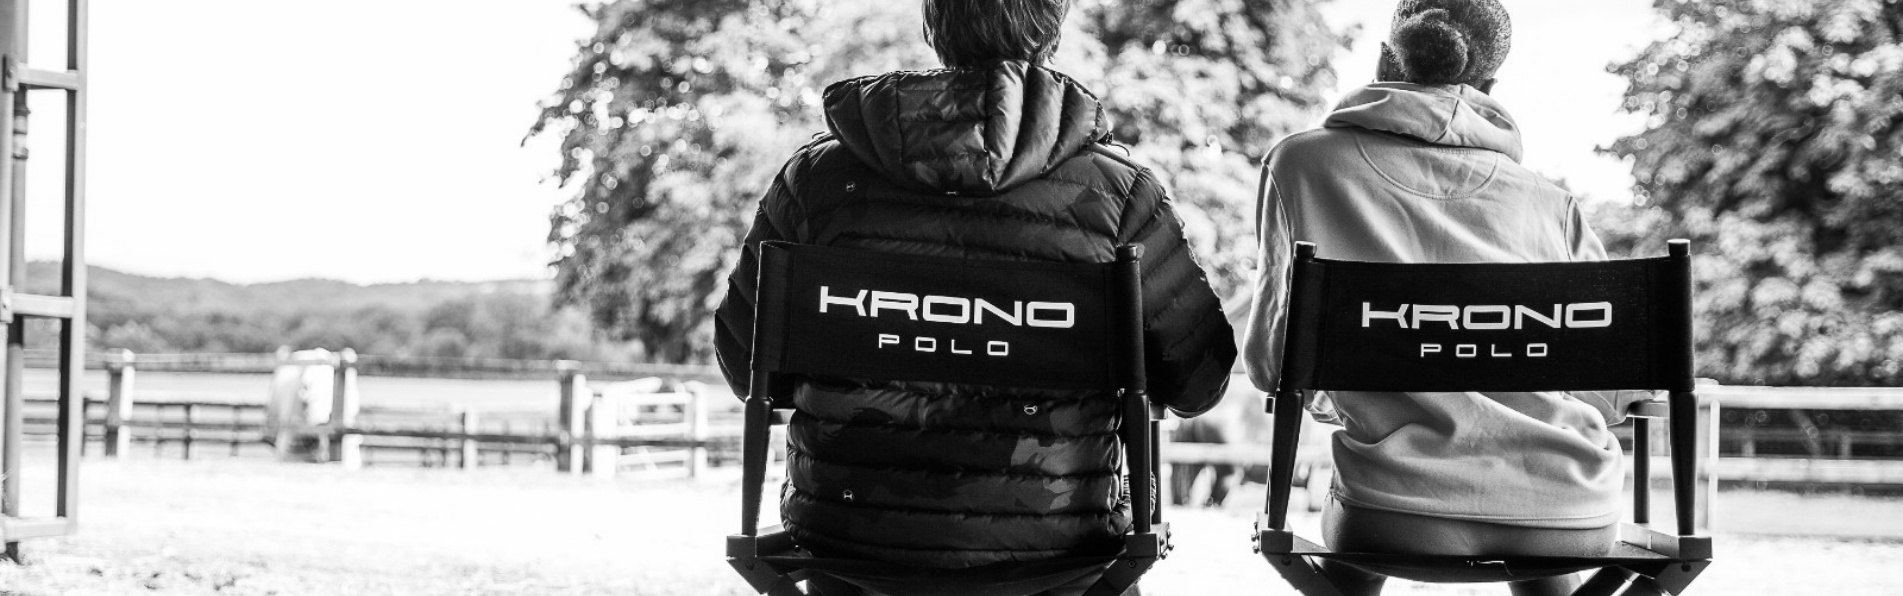 https://www.kronopolo.es/image/cache/catalog/Blog%20Banners/fall-winter-krono-polo-1903x596.png